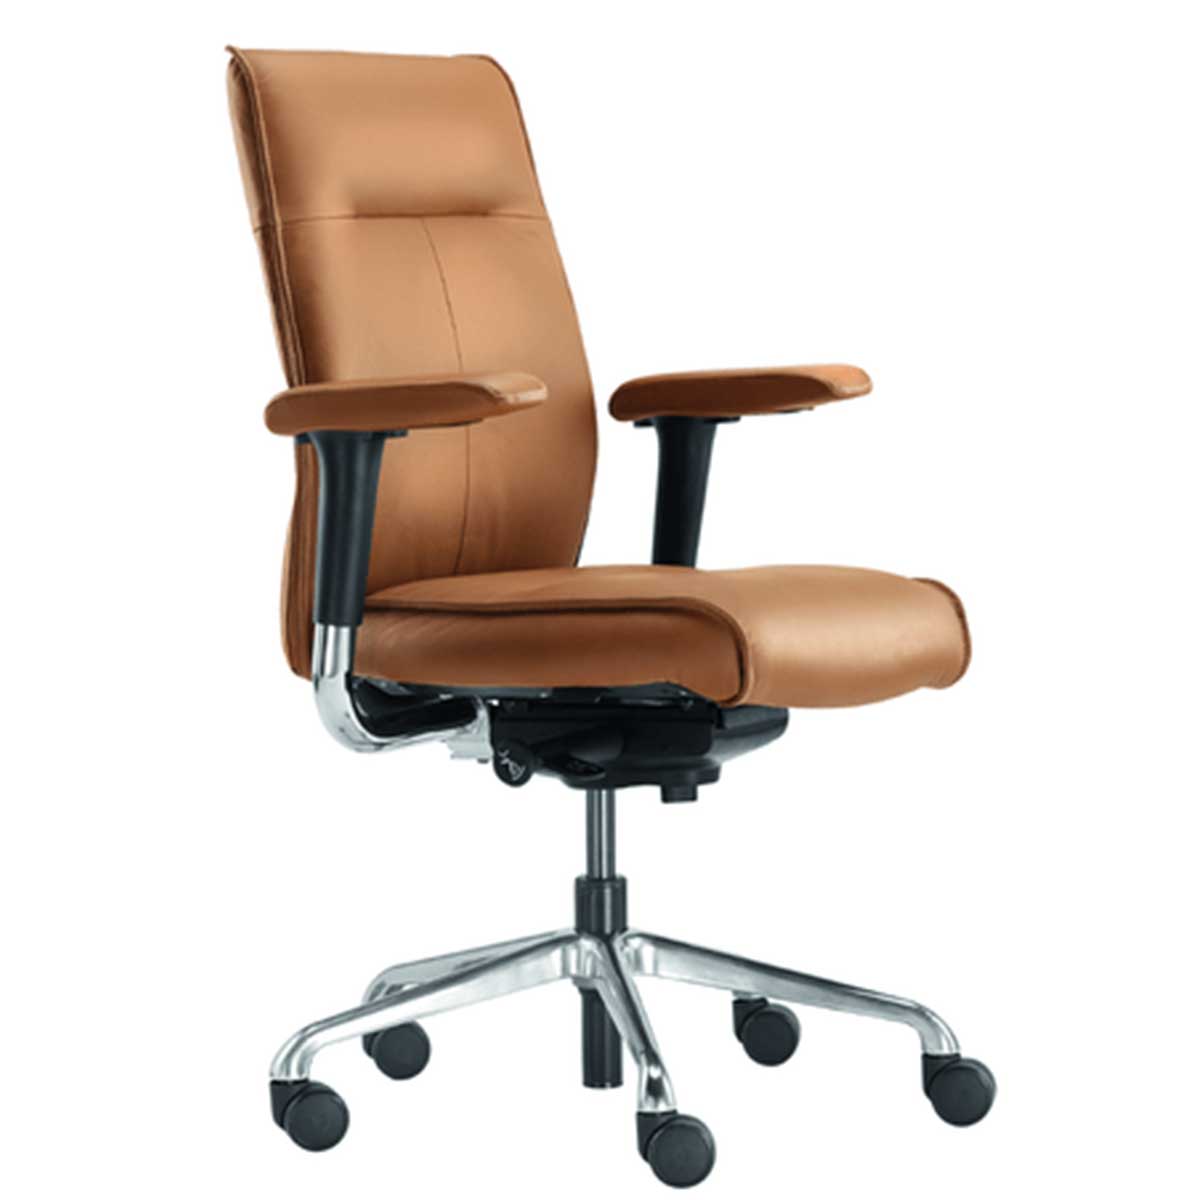 Sleek Chair Manufacturers, Suppliers in Faridabad